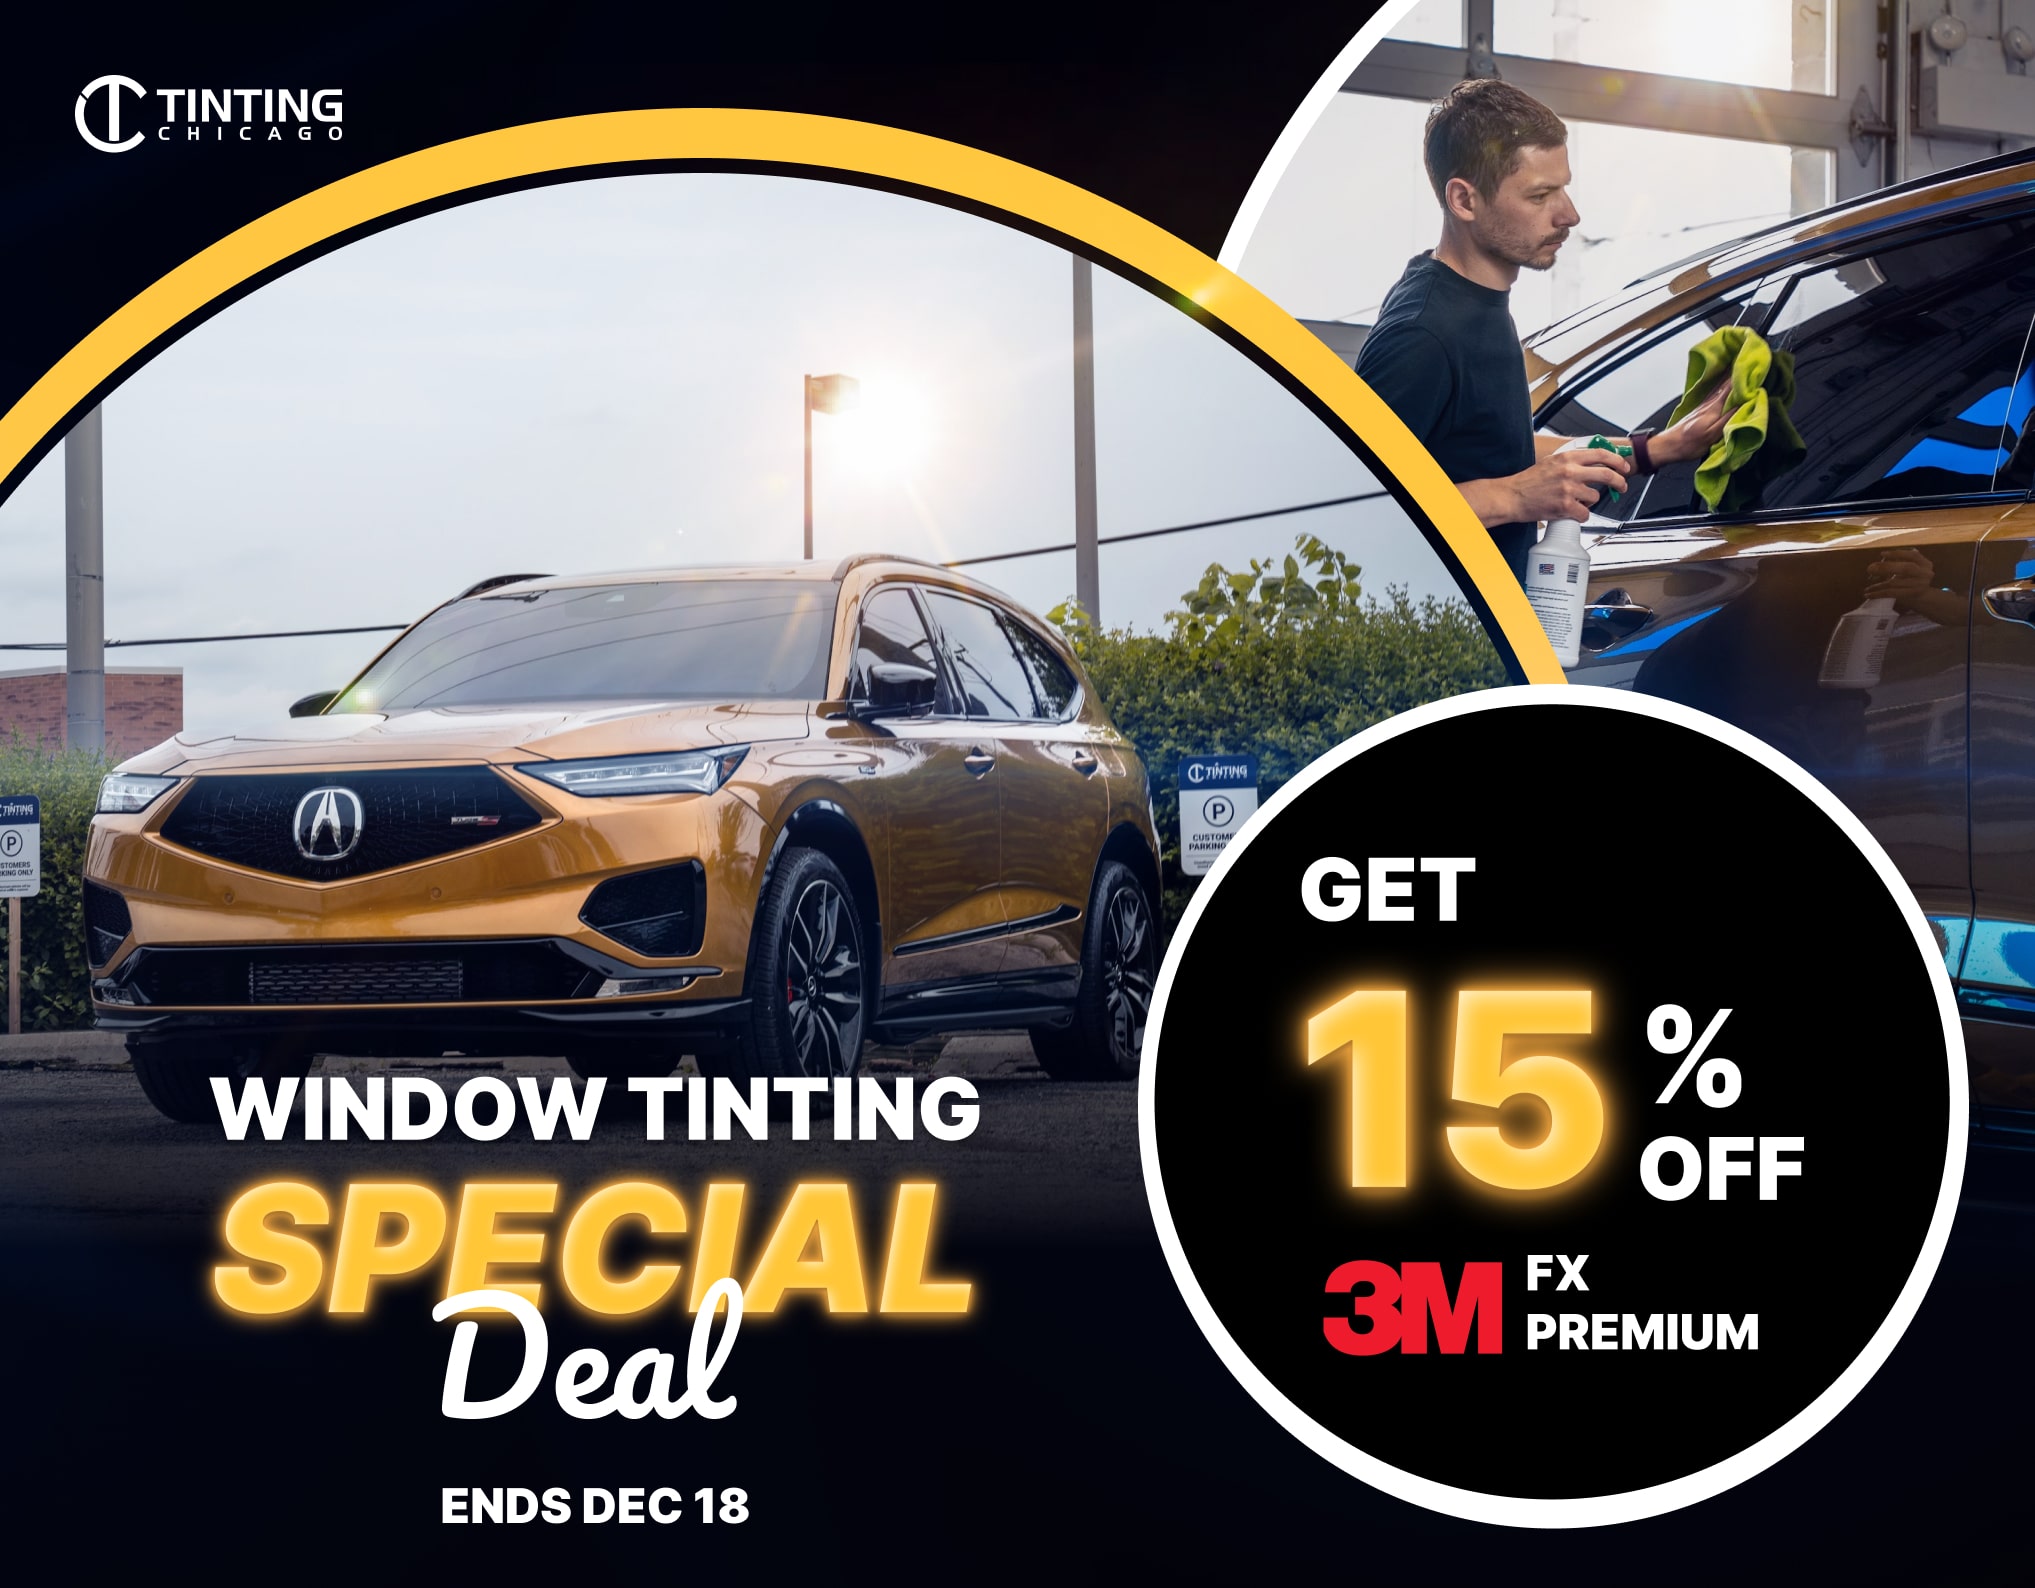 Special Deal - 15% OFF for 3M FX Premium